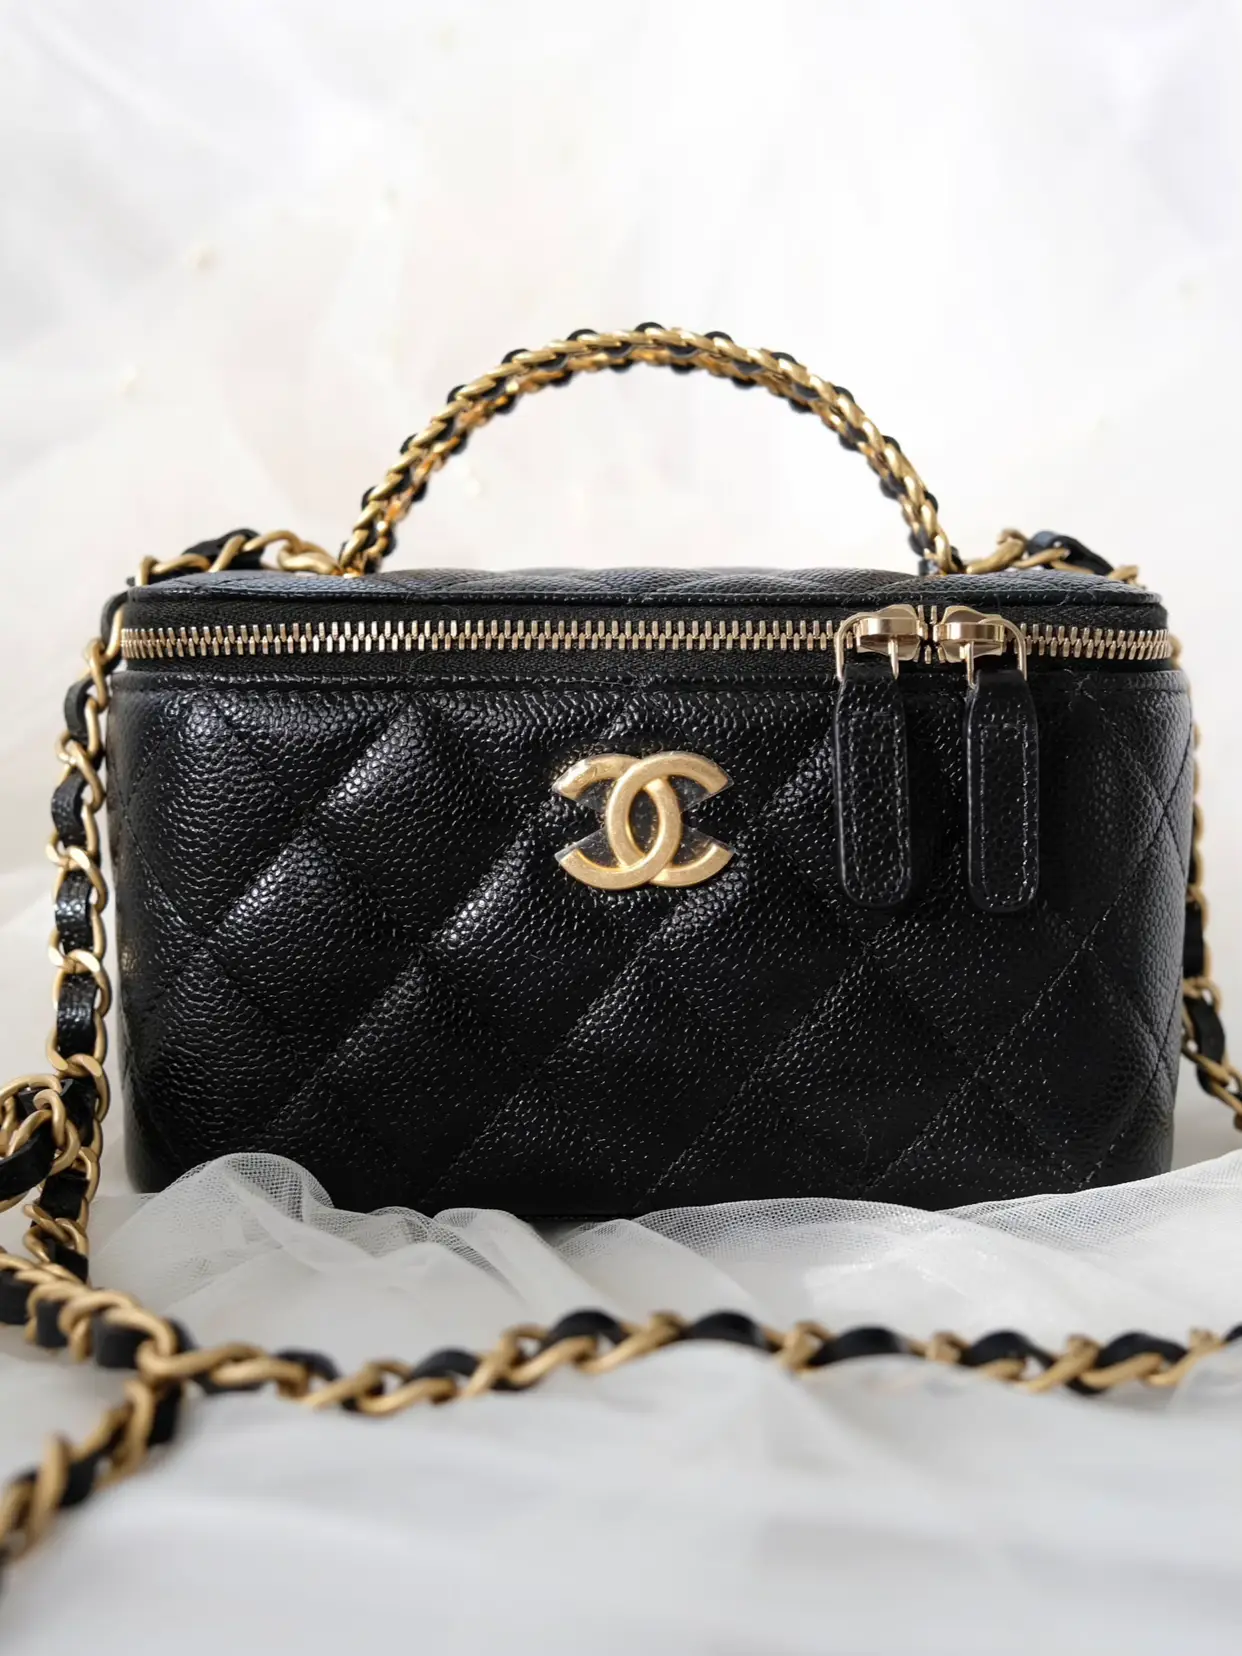 CHANEL 22 VANITY CASE BAG - 2022 / 22B NEW Collection : Unboxing / Modshots  / what fits?! 